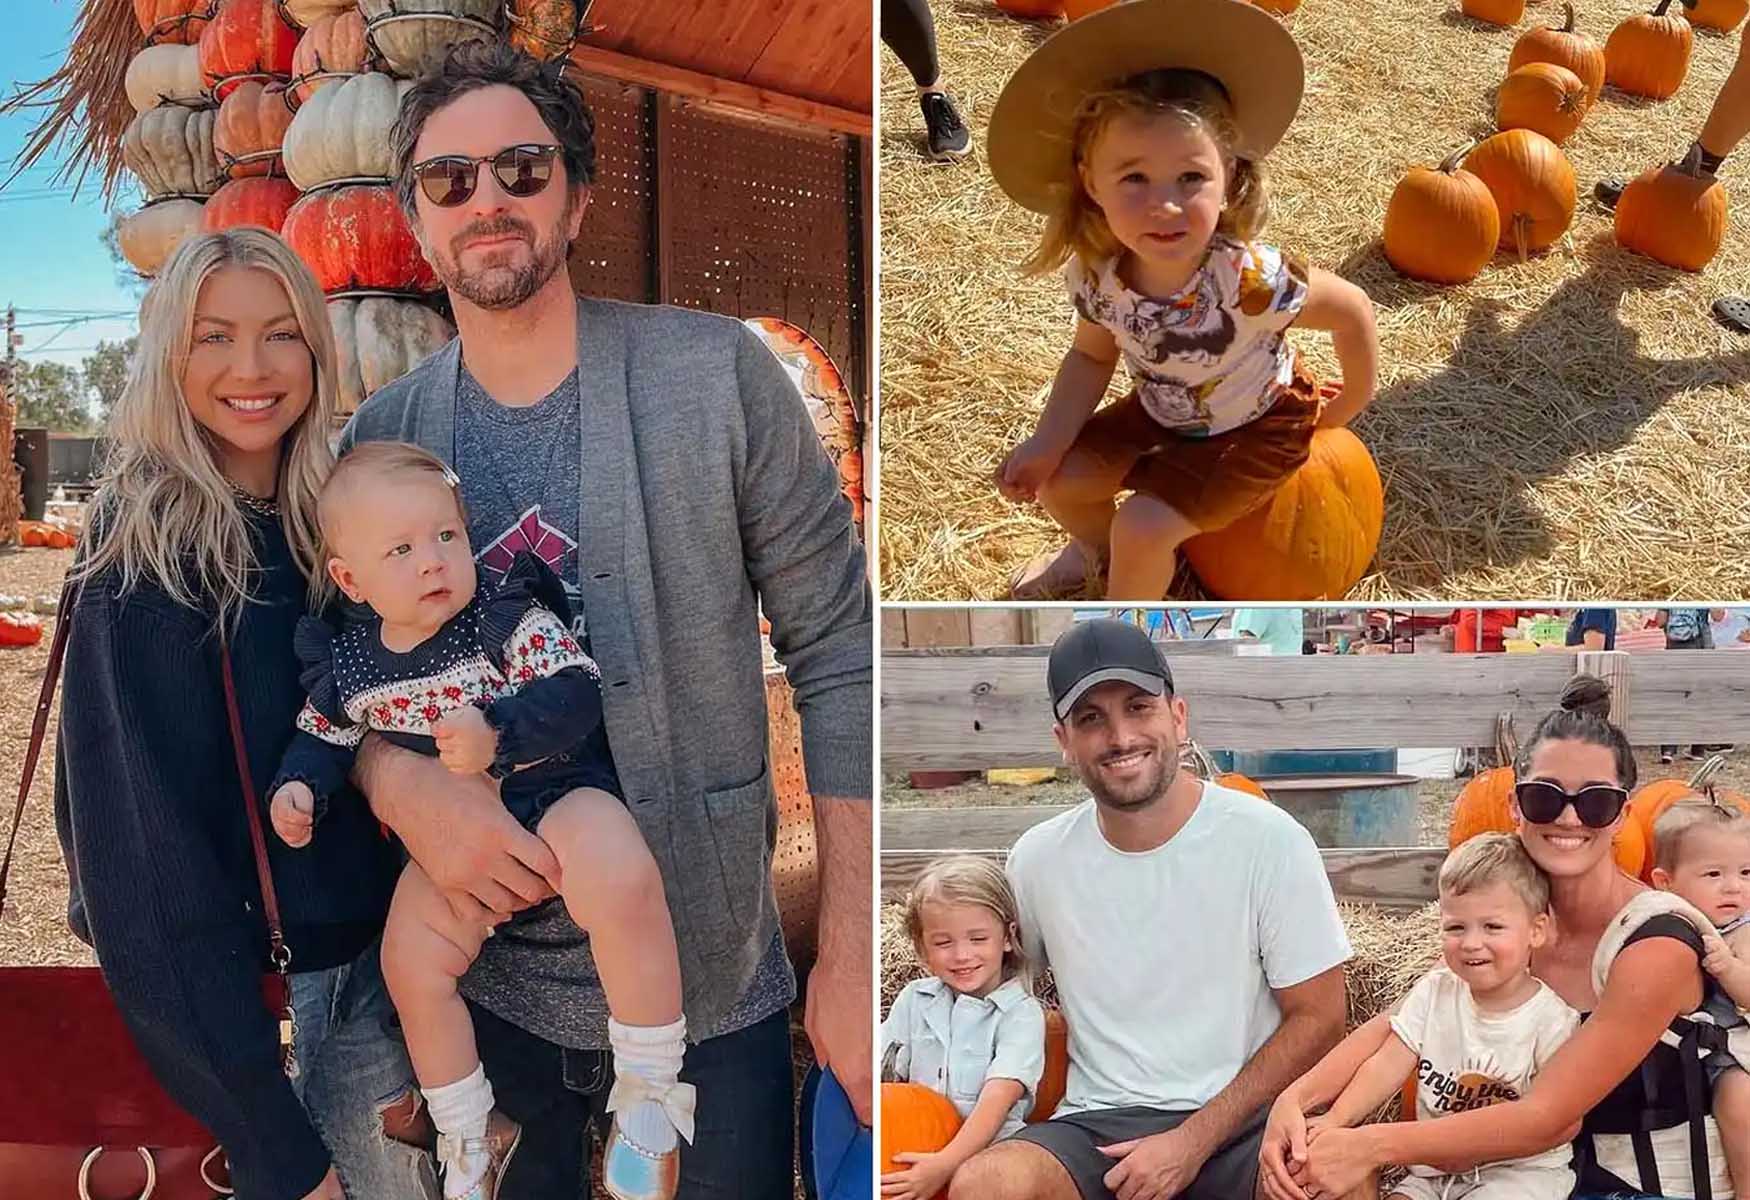 Tom Wilson enjoying his time at the pumpkin patch